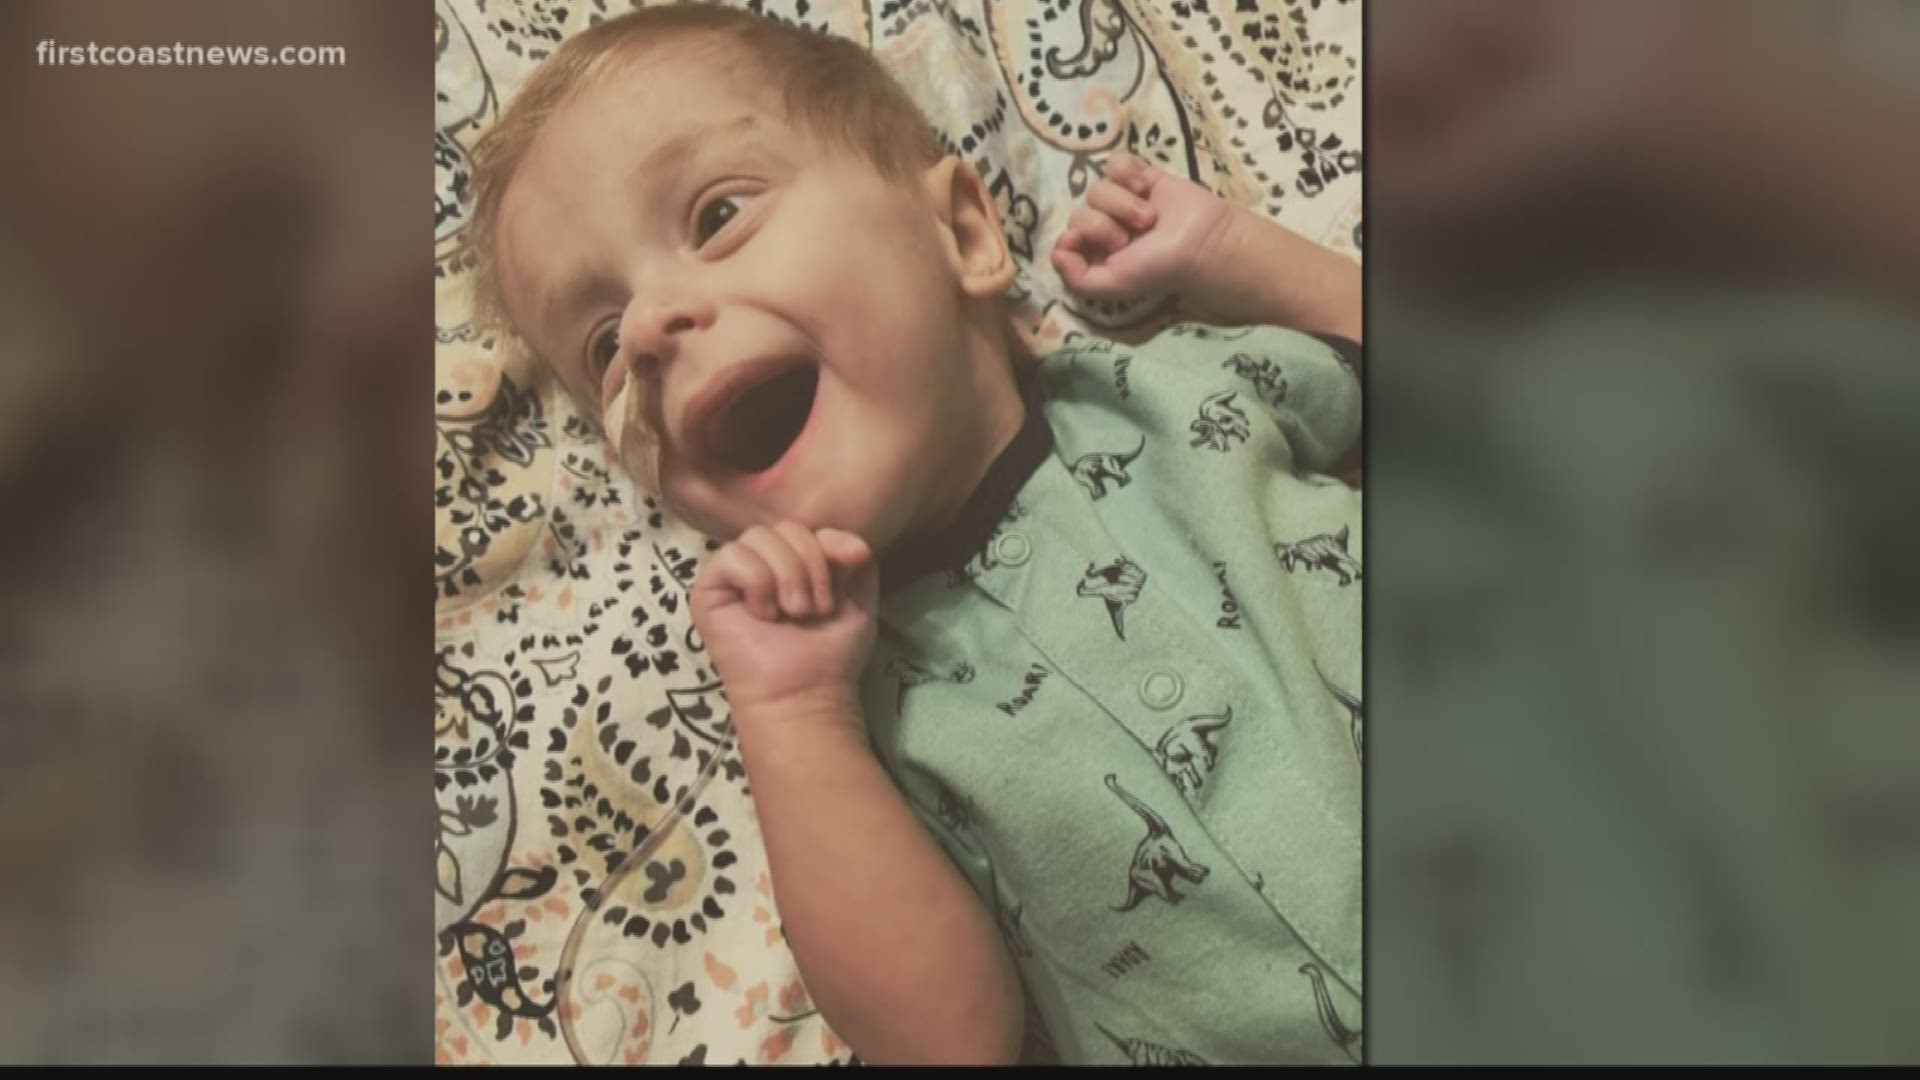 Doctors have not been able to diagnose specifically what Ethan is up against, but his family is praying a new liver will give him a new lease on life.